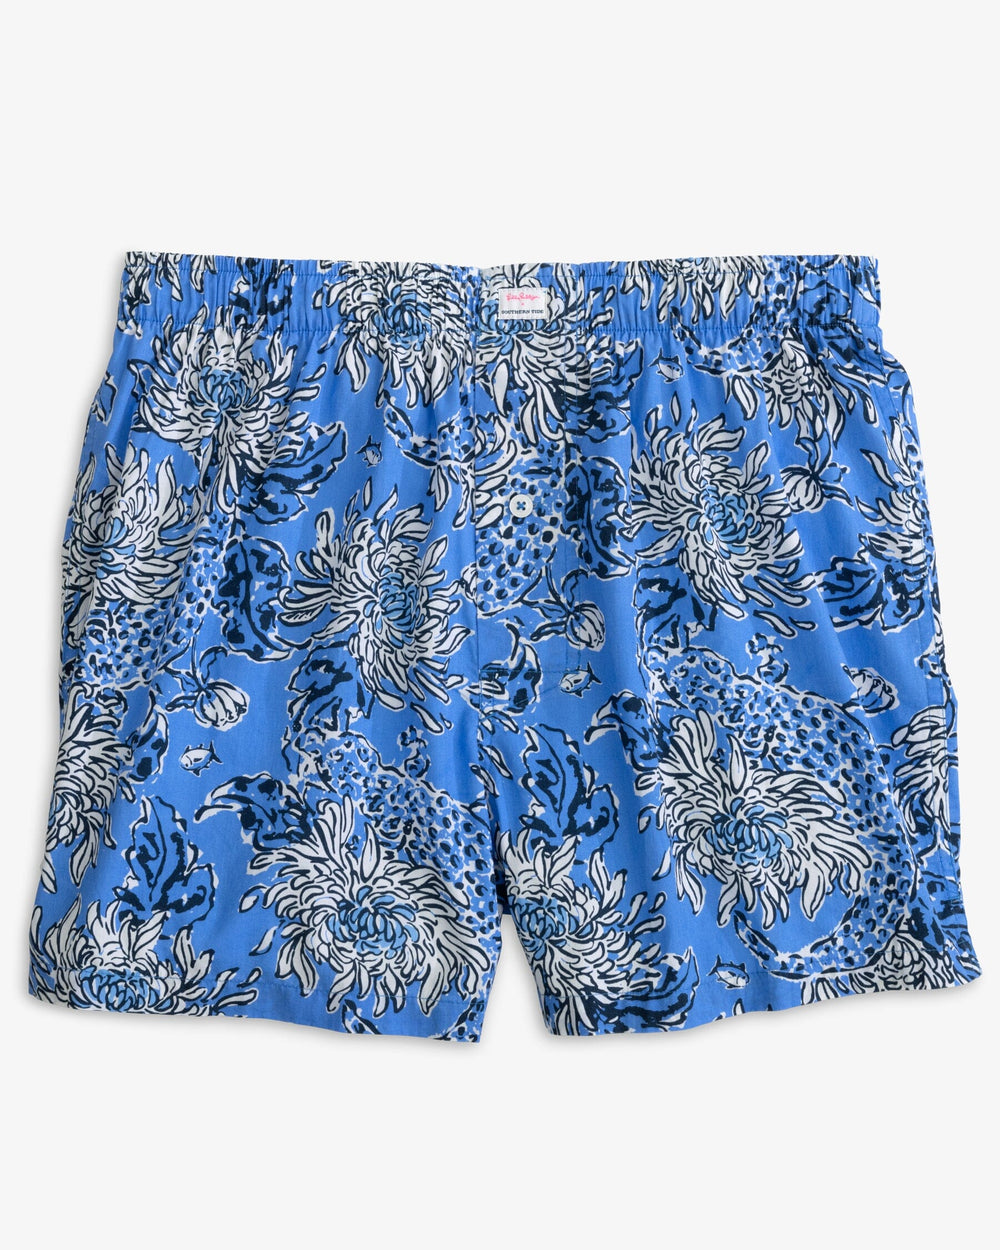 The front view of the Croc and Lock It Boxer by Southern Tide - Boca Blue